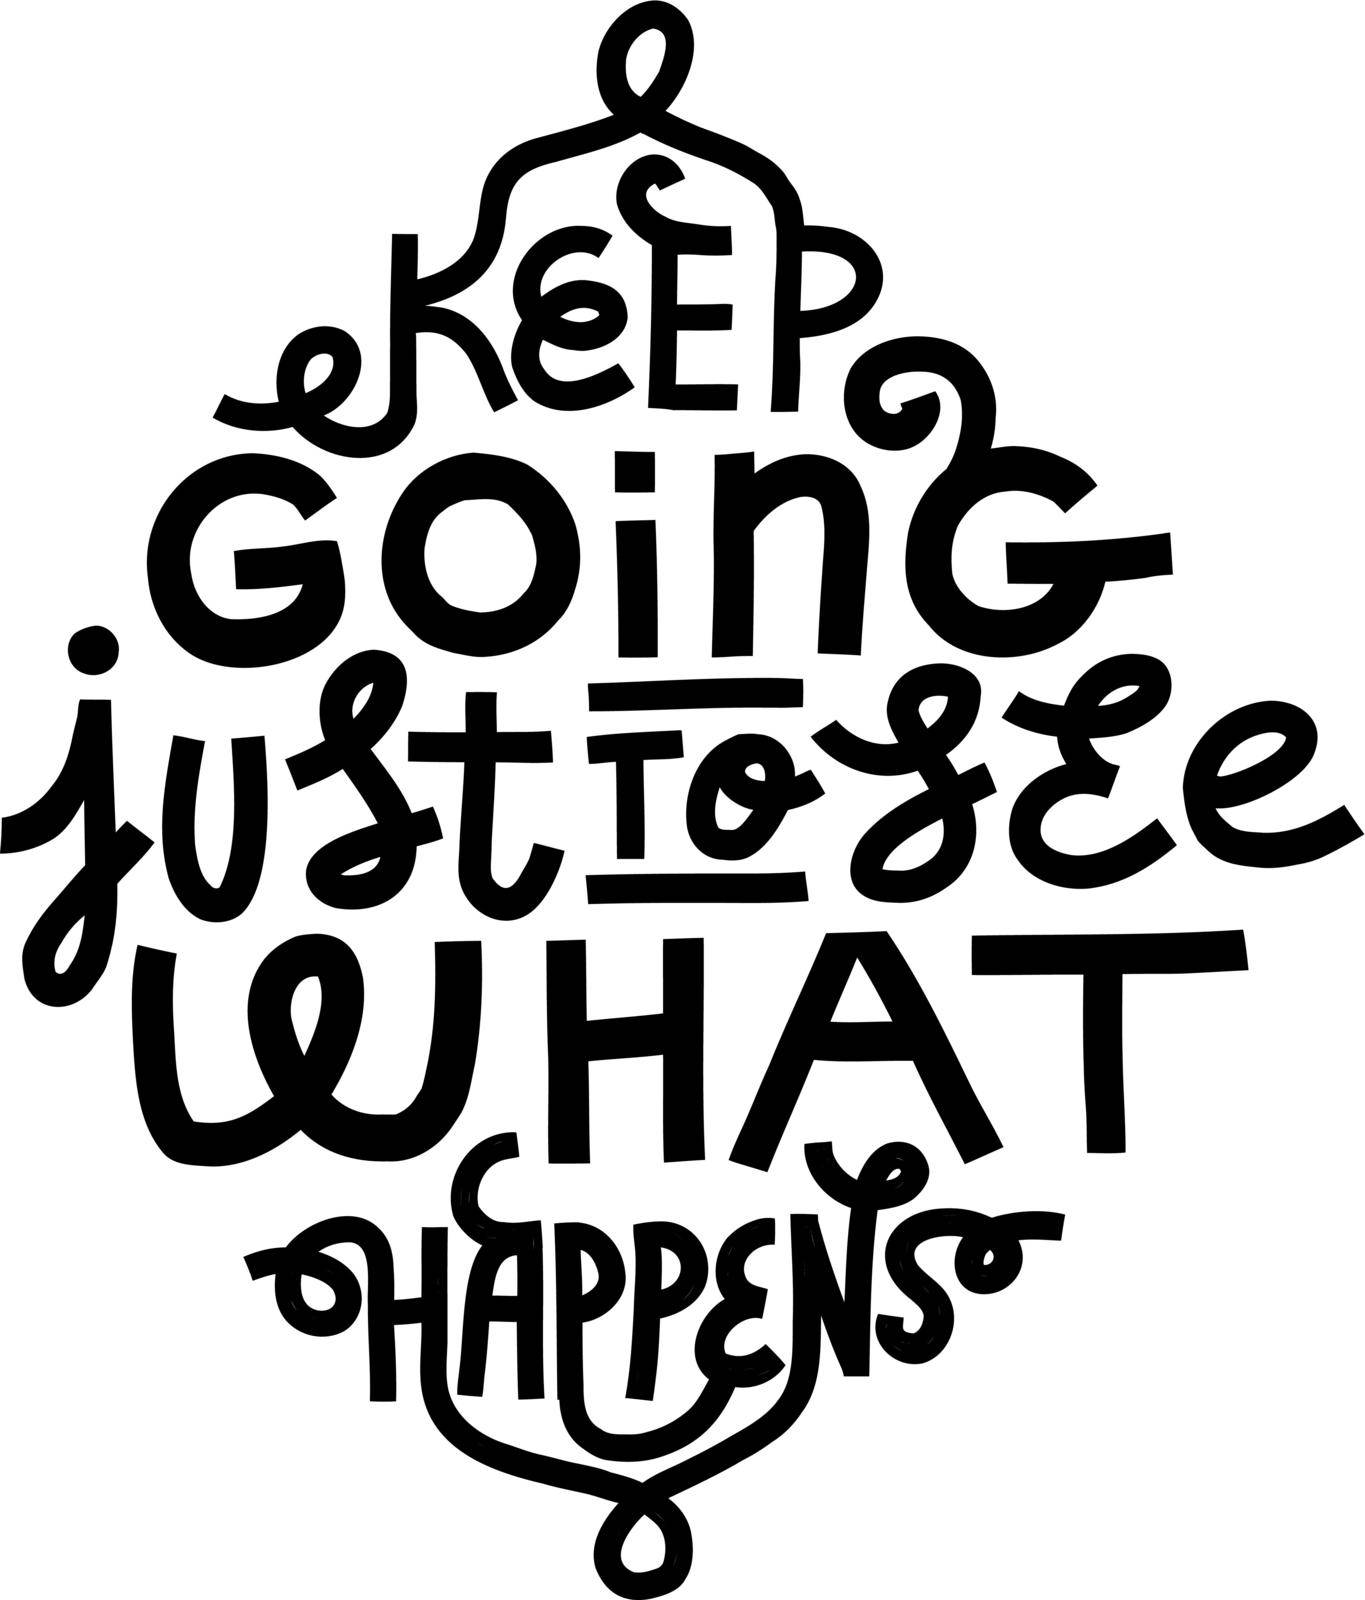 Keep going just to see what happens. Motivational quote poster. Black hand-drawn lettering on a white background. Ready for screen printing, laser-cut, plotter.